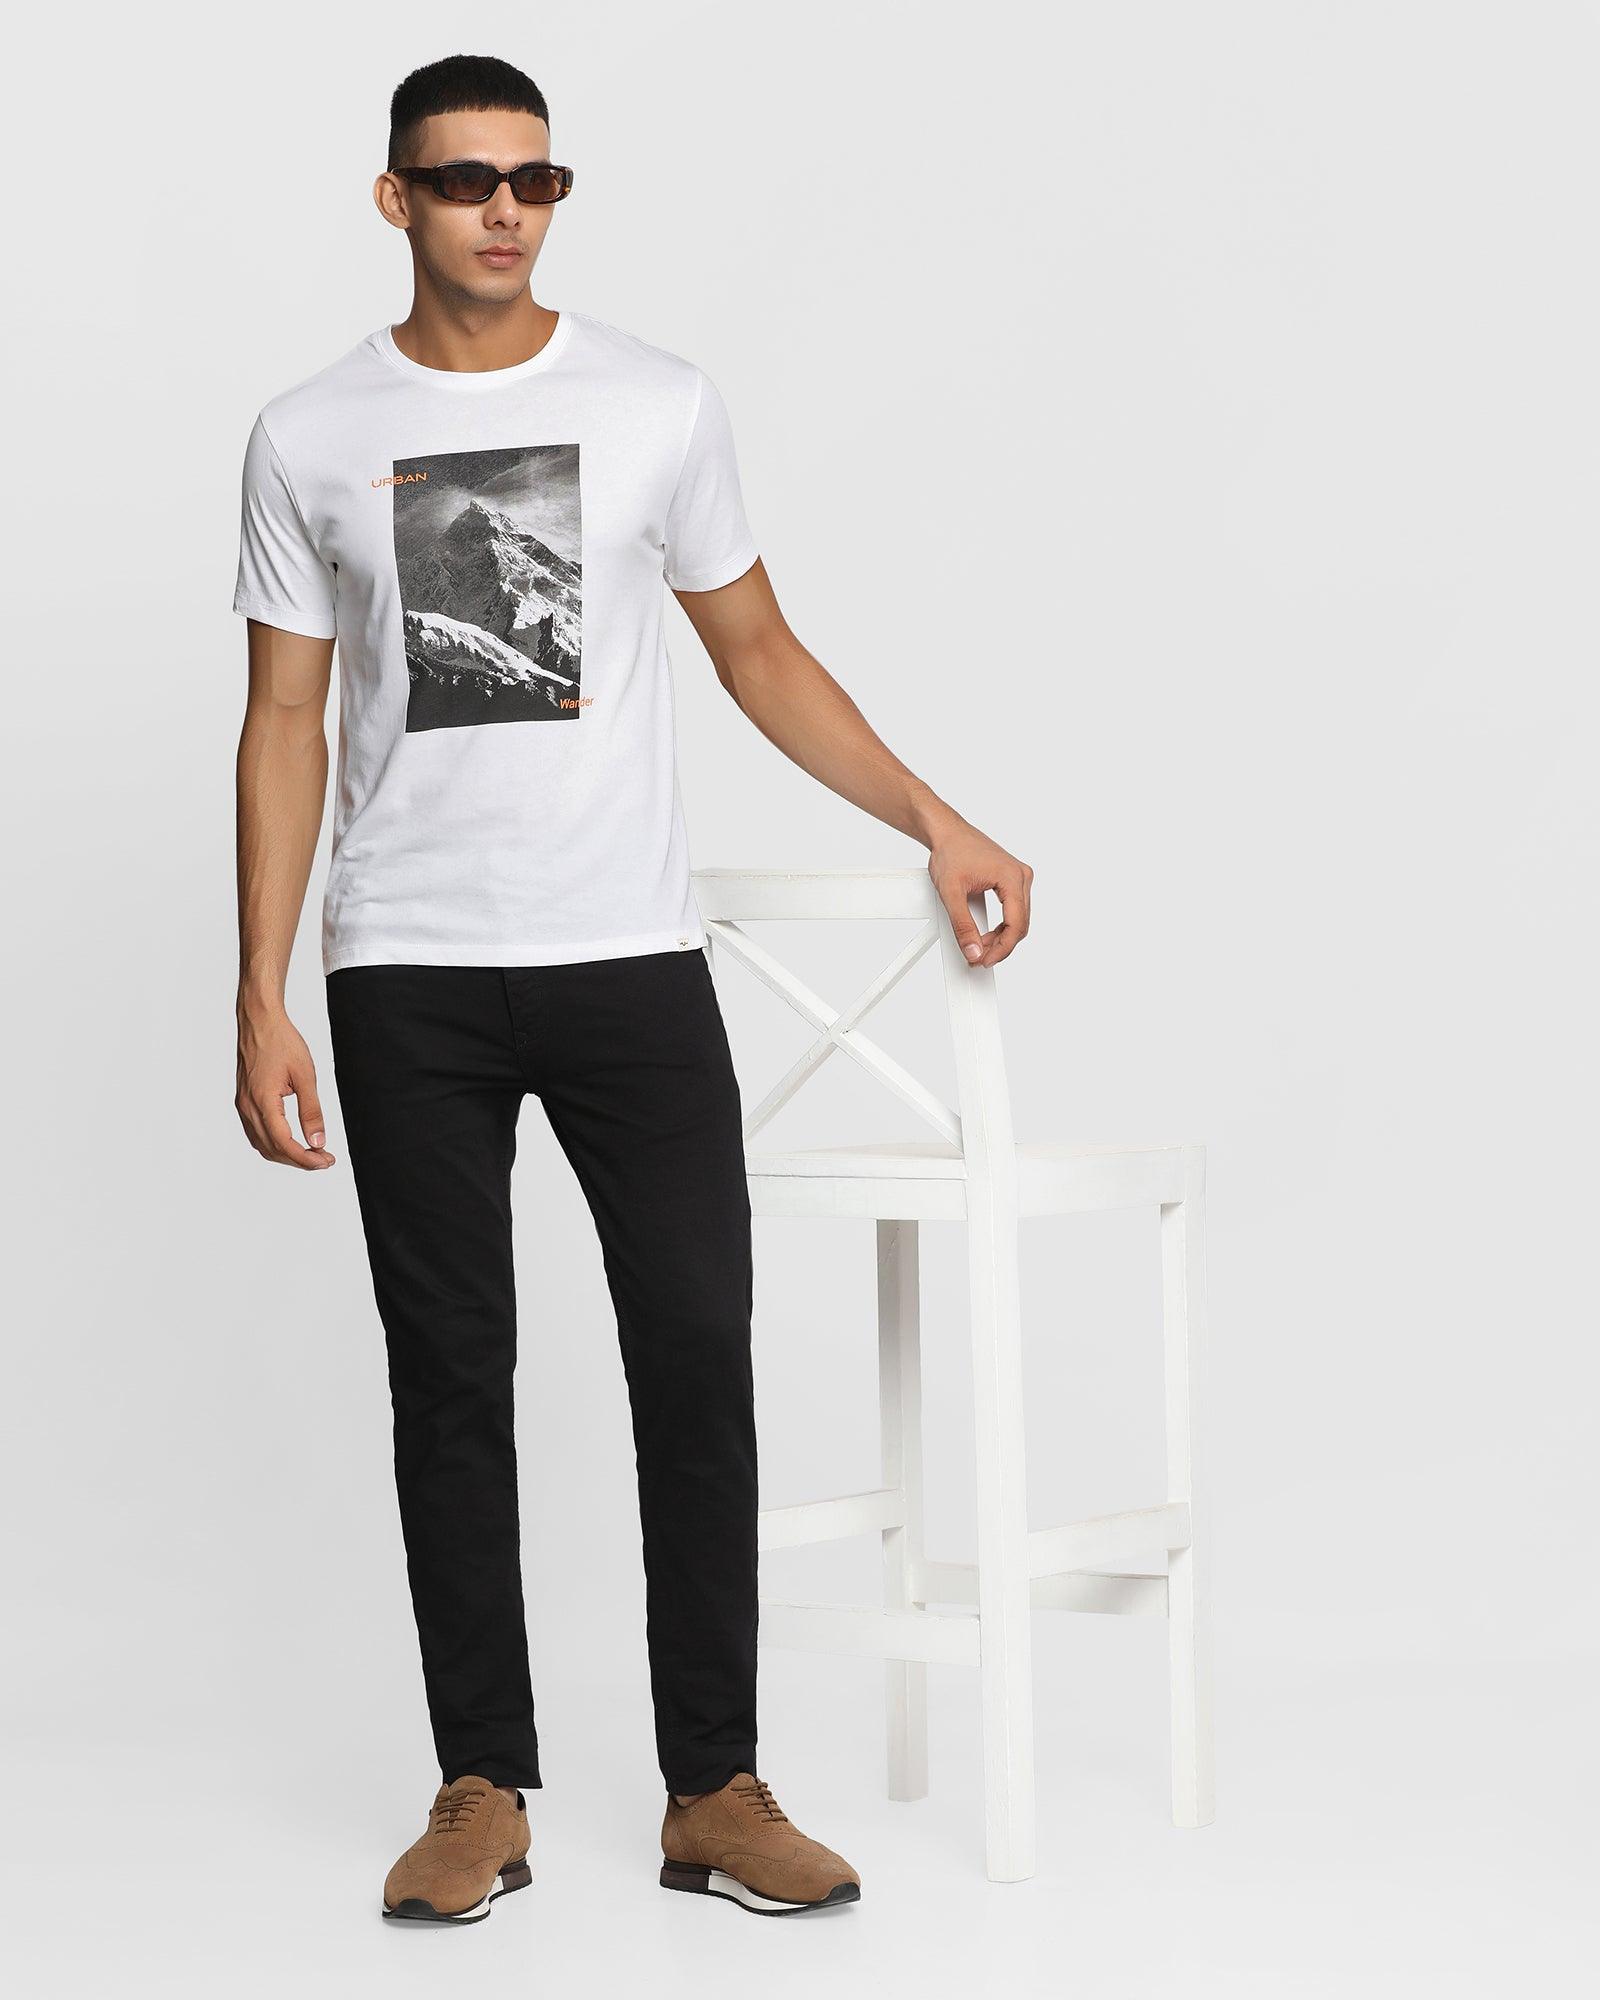 Crew Neck White Printed T Shirt - Ander